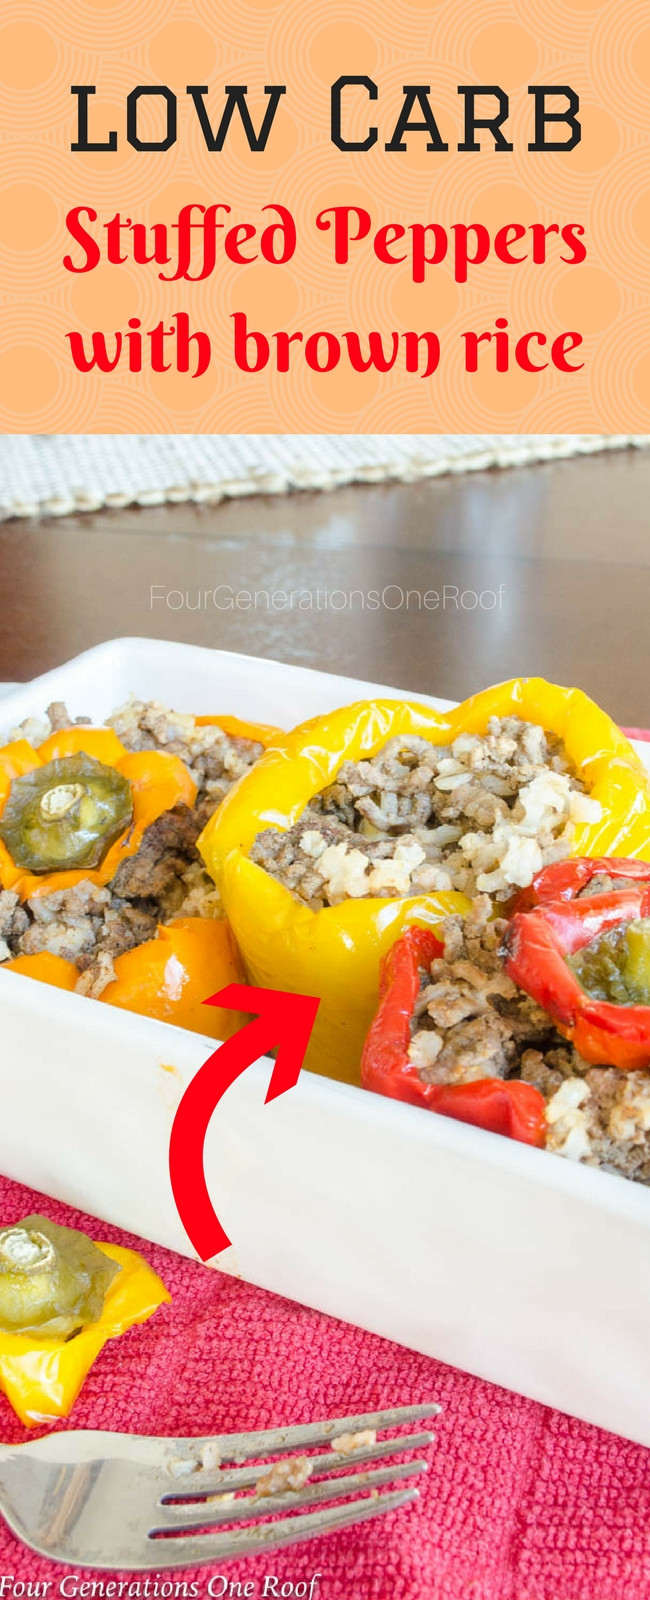 Low Carb Brown Rice
 Fast Low Carb Stuffed Peppers with Brown Rice Four